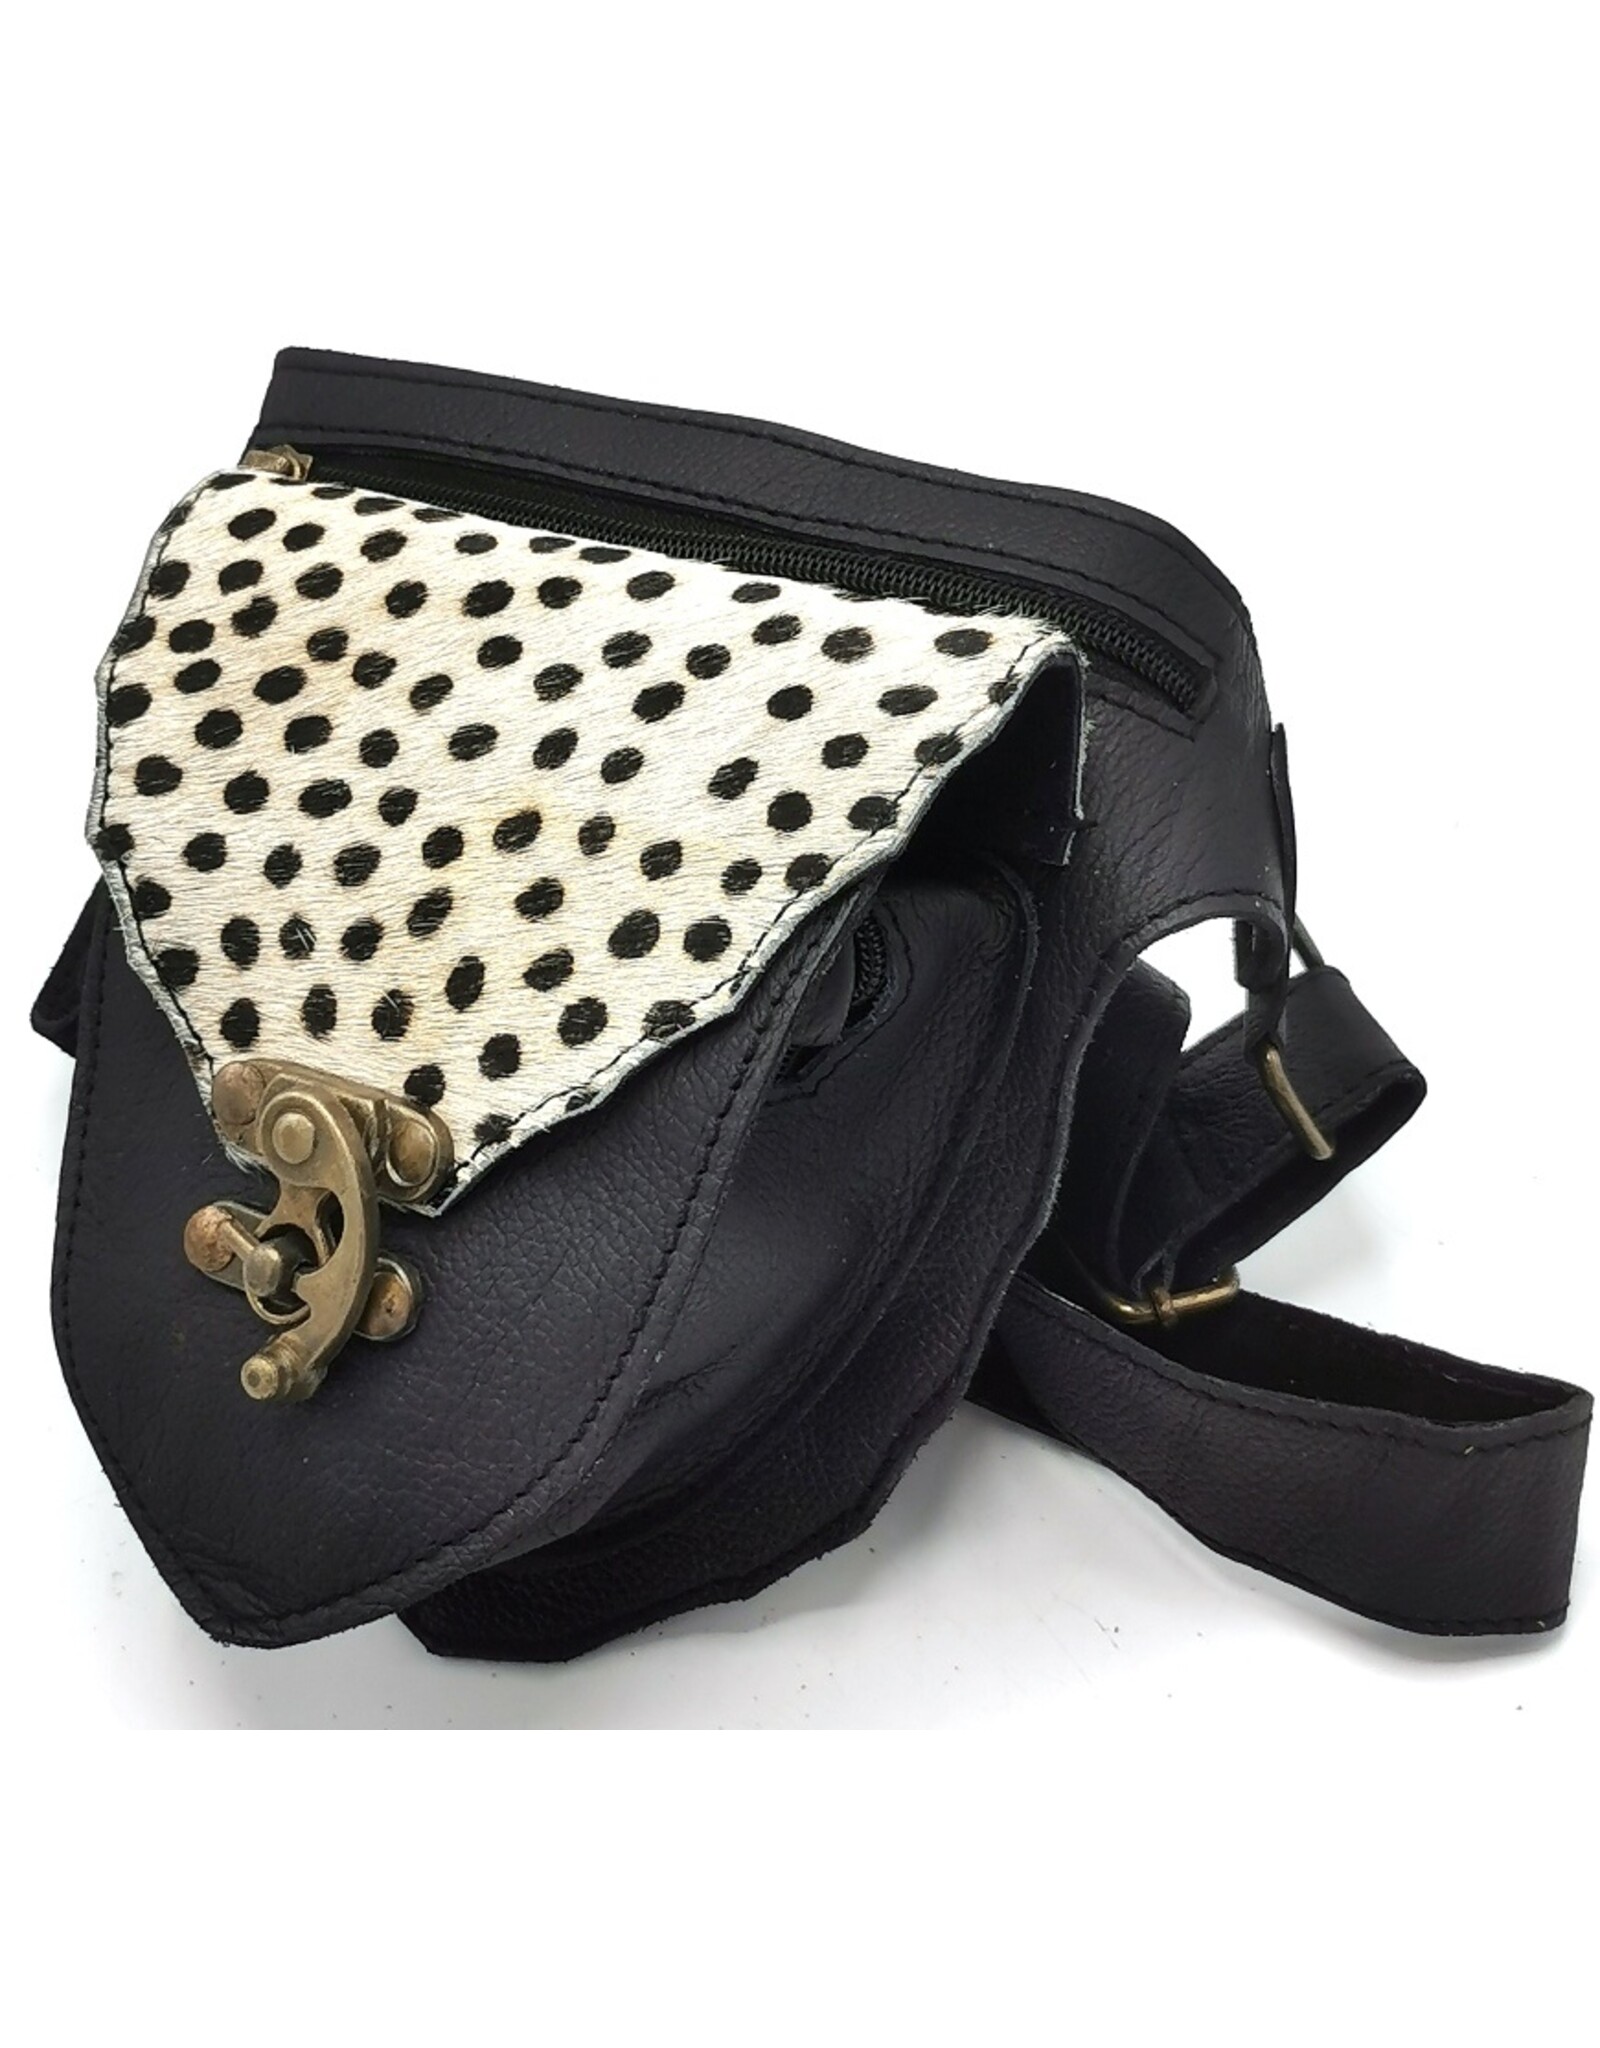 Trukado Leather Festival bags, waist bags and belt bags - Cowhide waist bag with Animal Print and Hook Ibiza black